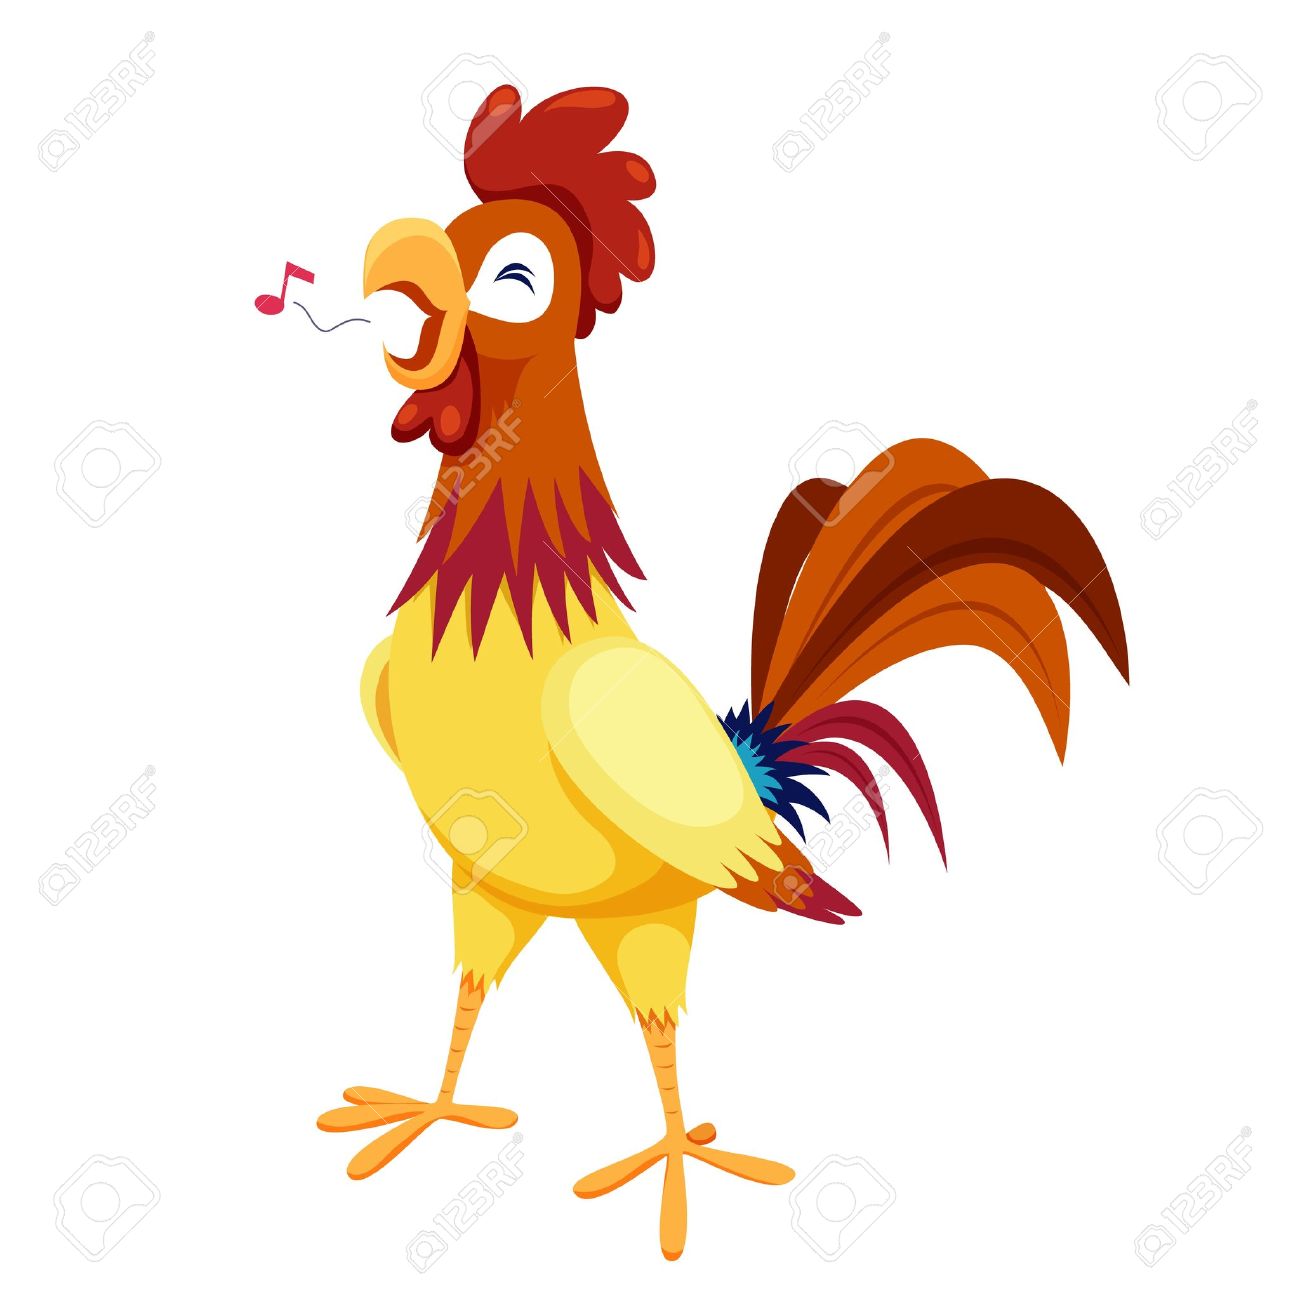 Cock On White Background Royalty Free Cliparts, Vectors, And Stock.